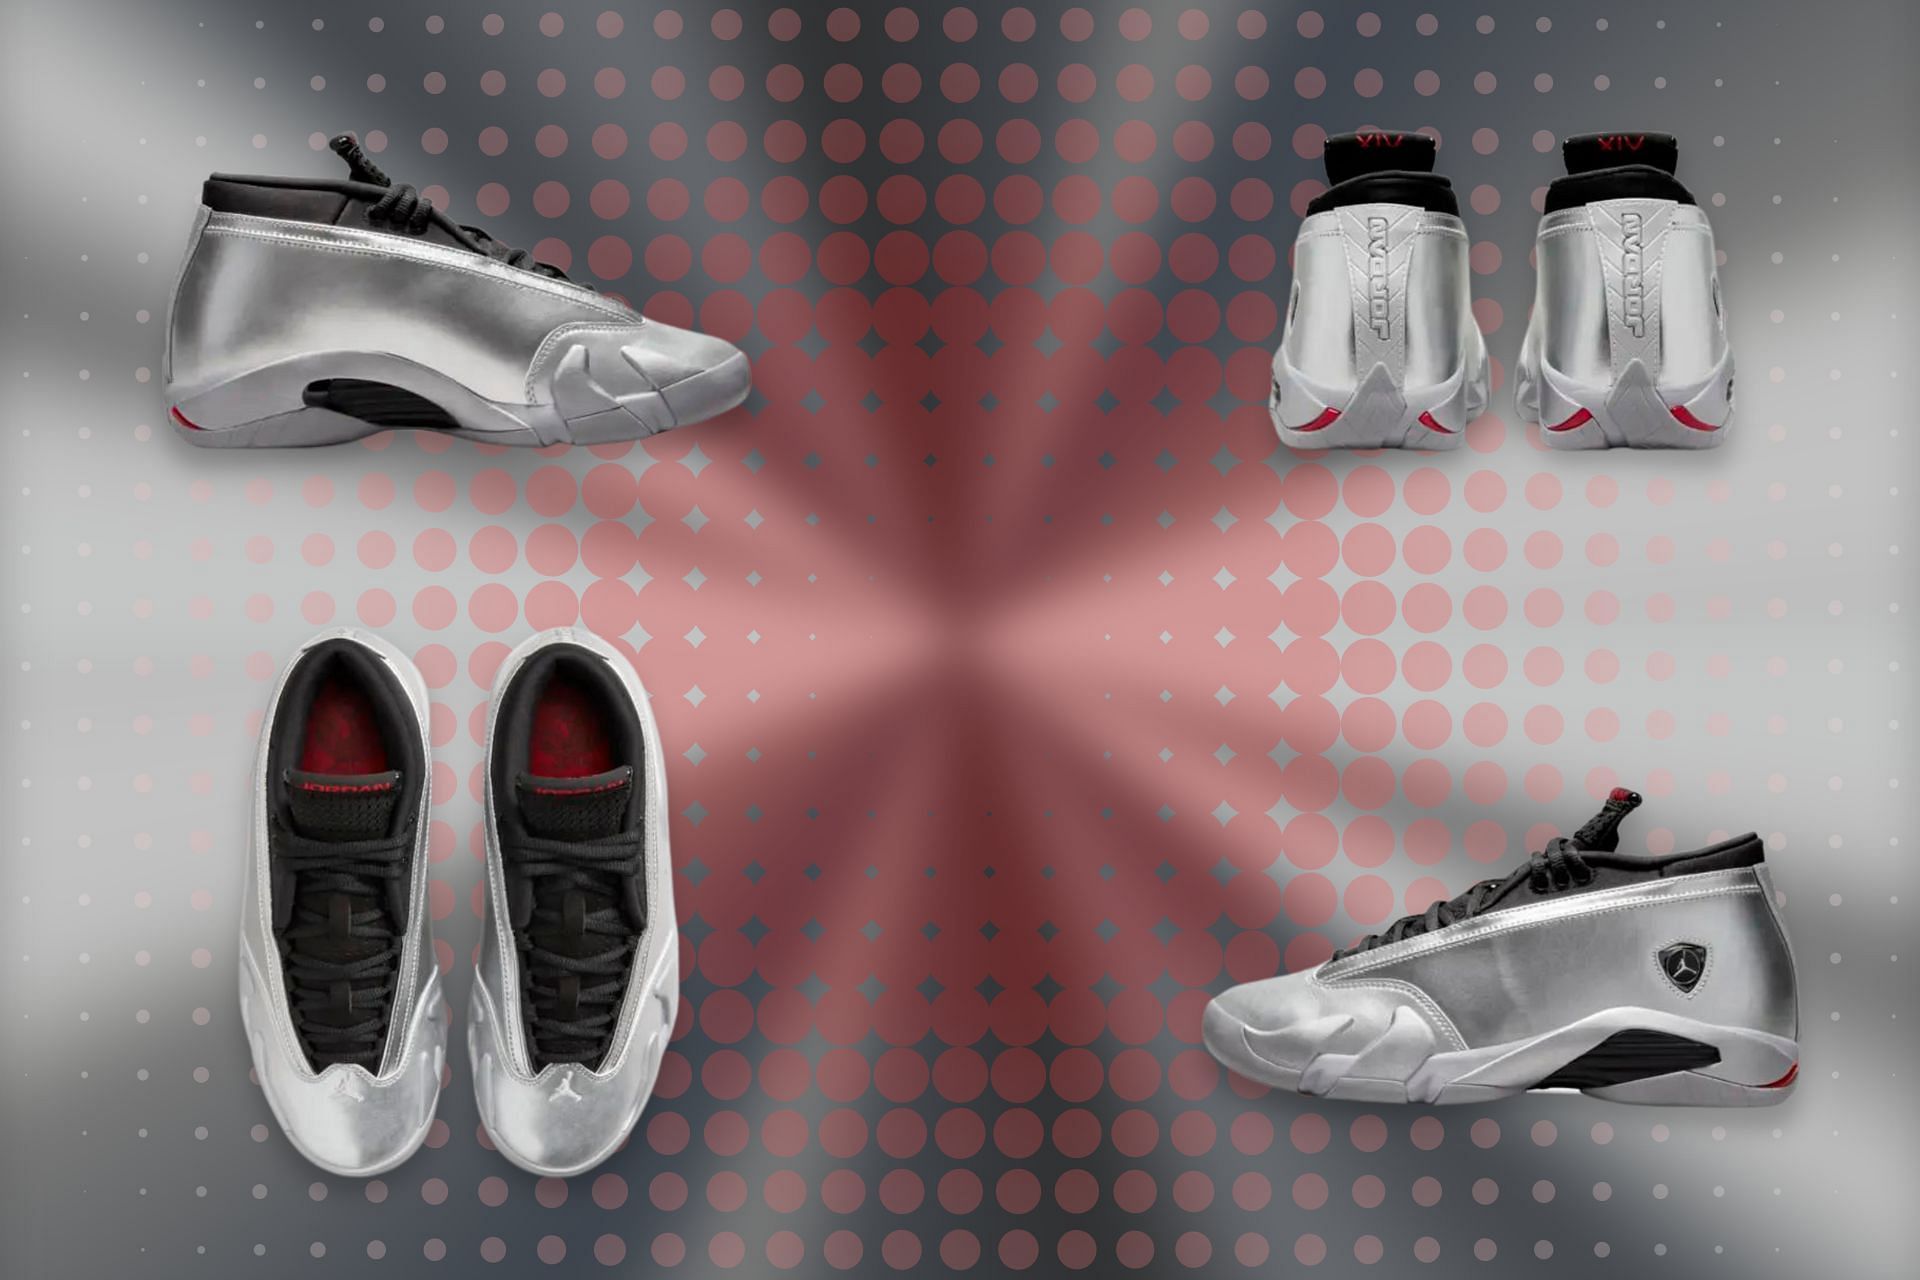 The upcoming Nike Air Jordan 14 Low &quot;Metallic Silver&quot; sneakers will come exclusively in women&#039;s sizes (Image via Sportskeeda)